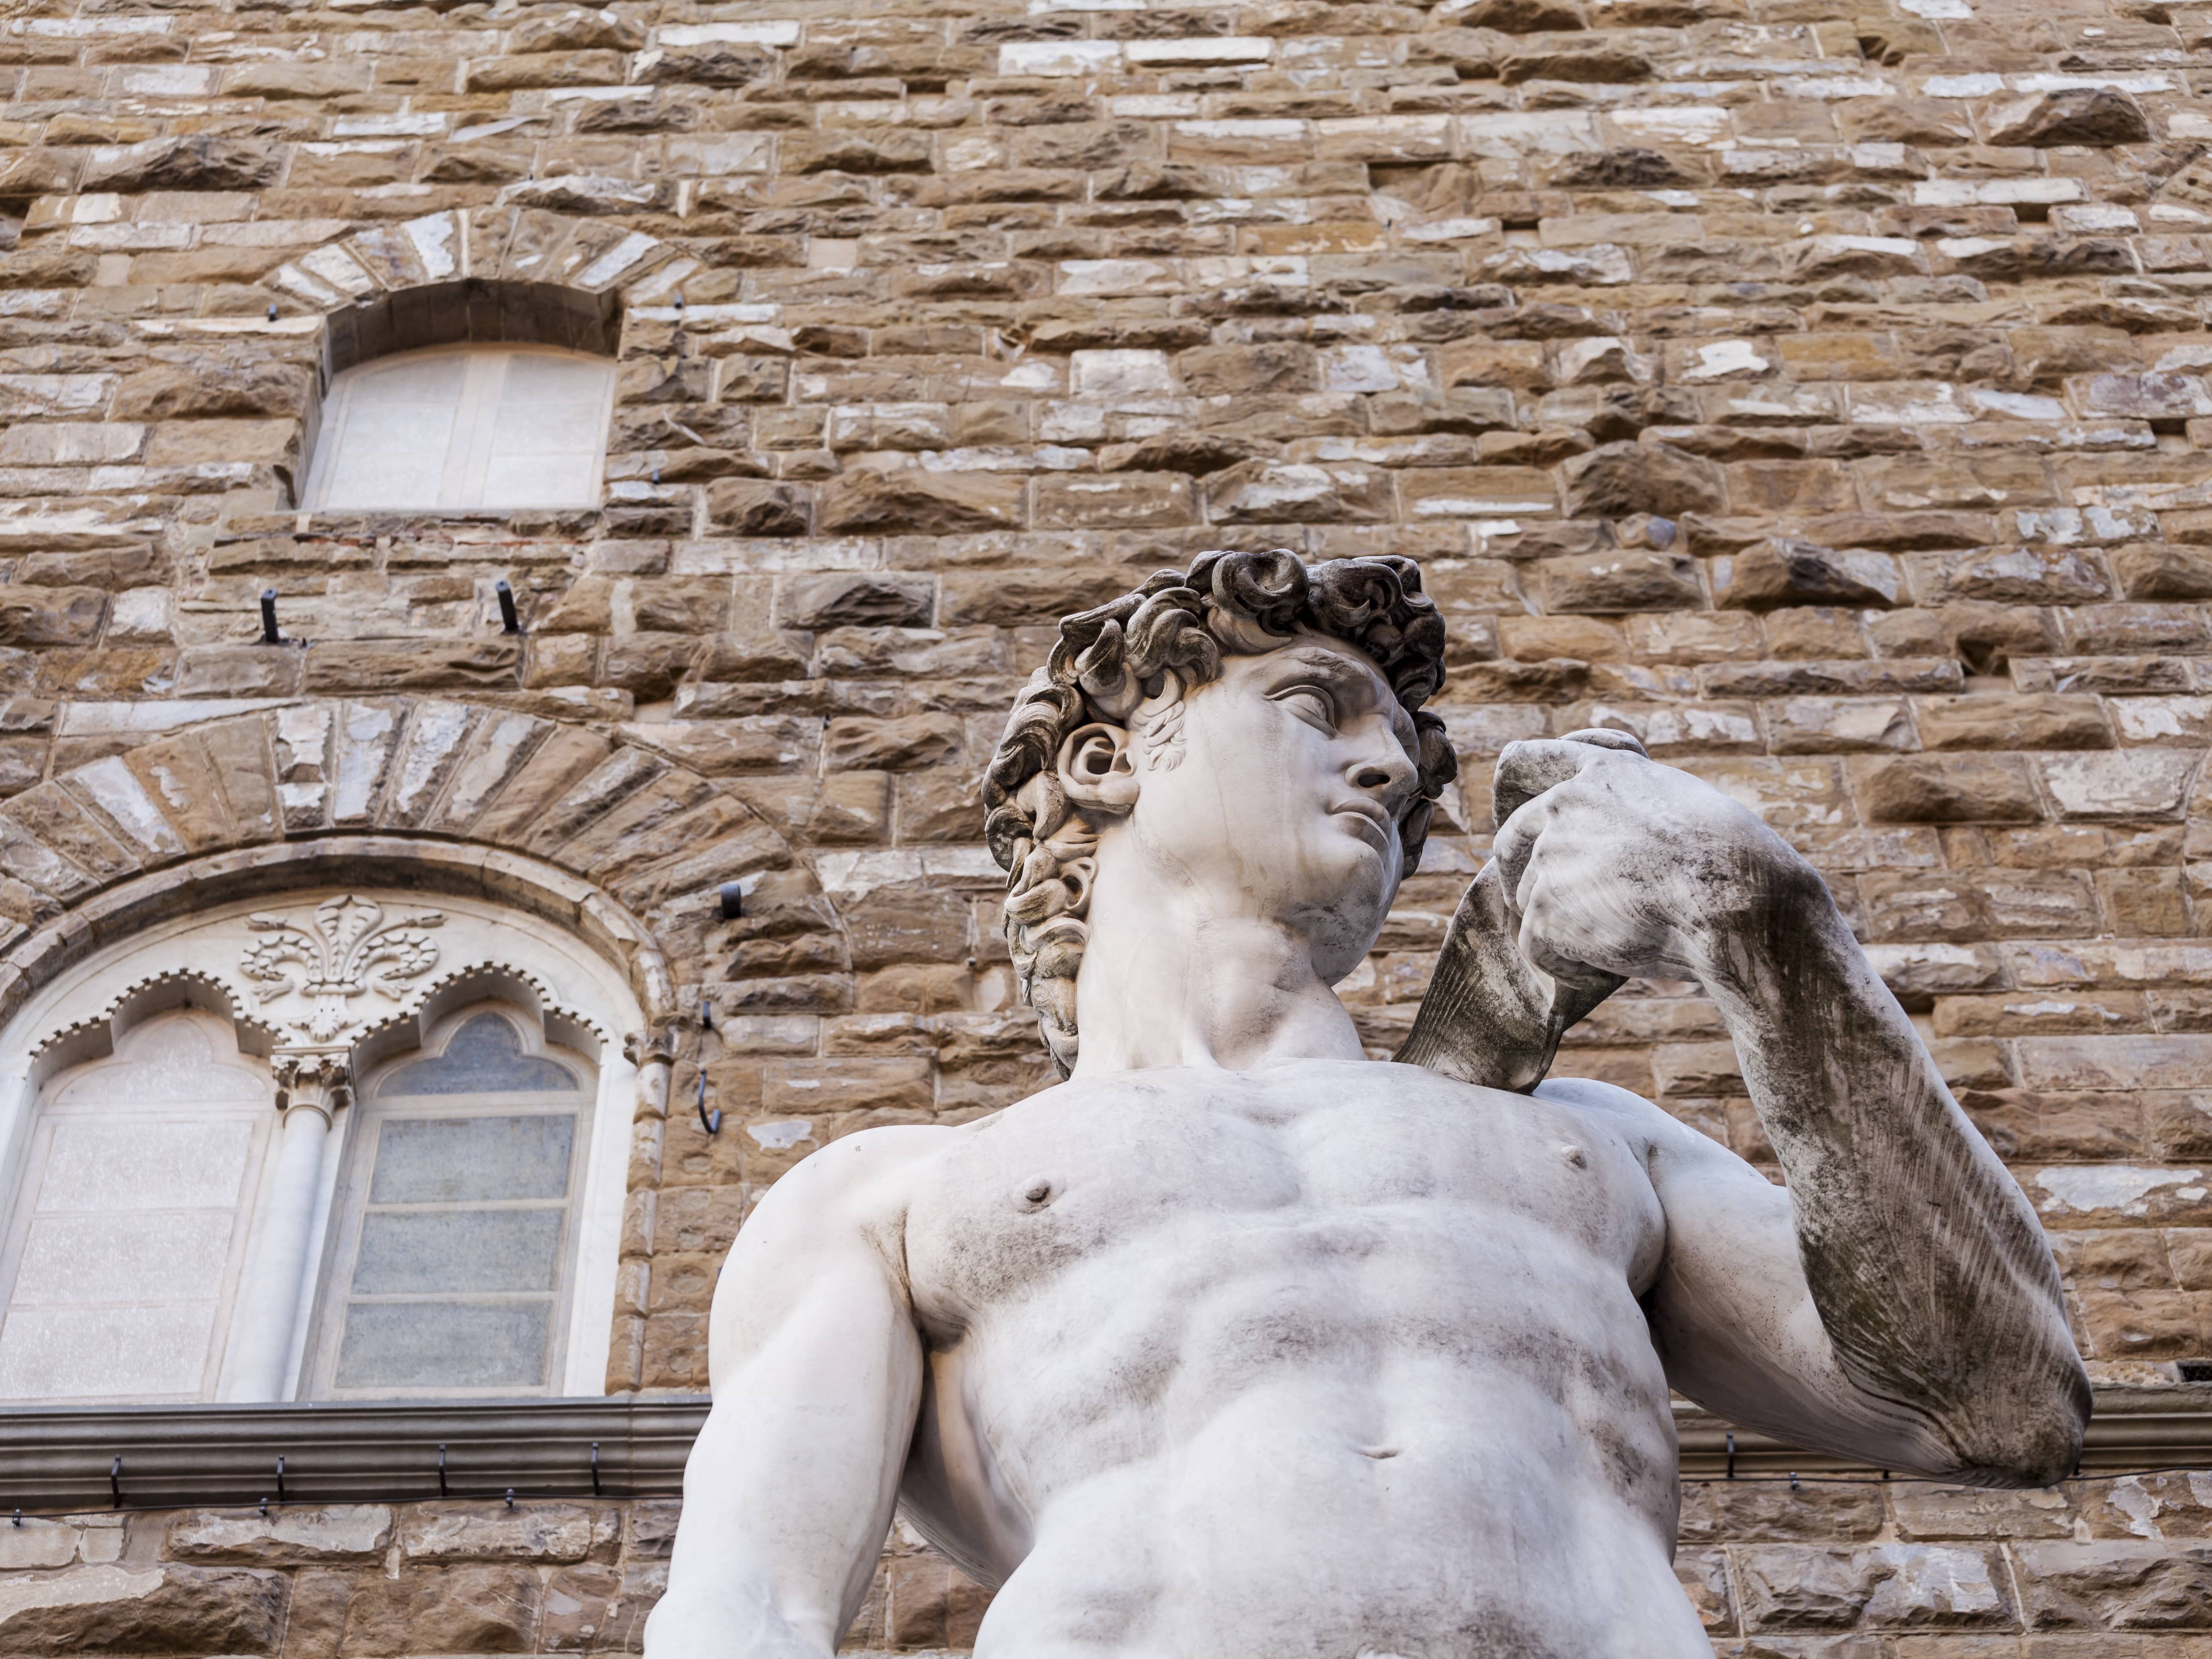  Enjoy a private viewing of Michelangelo’s David  